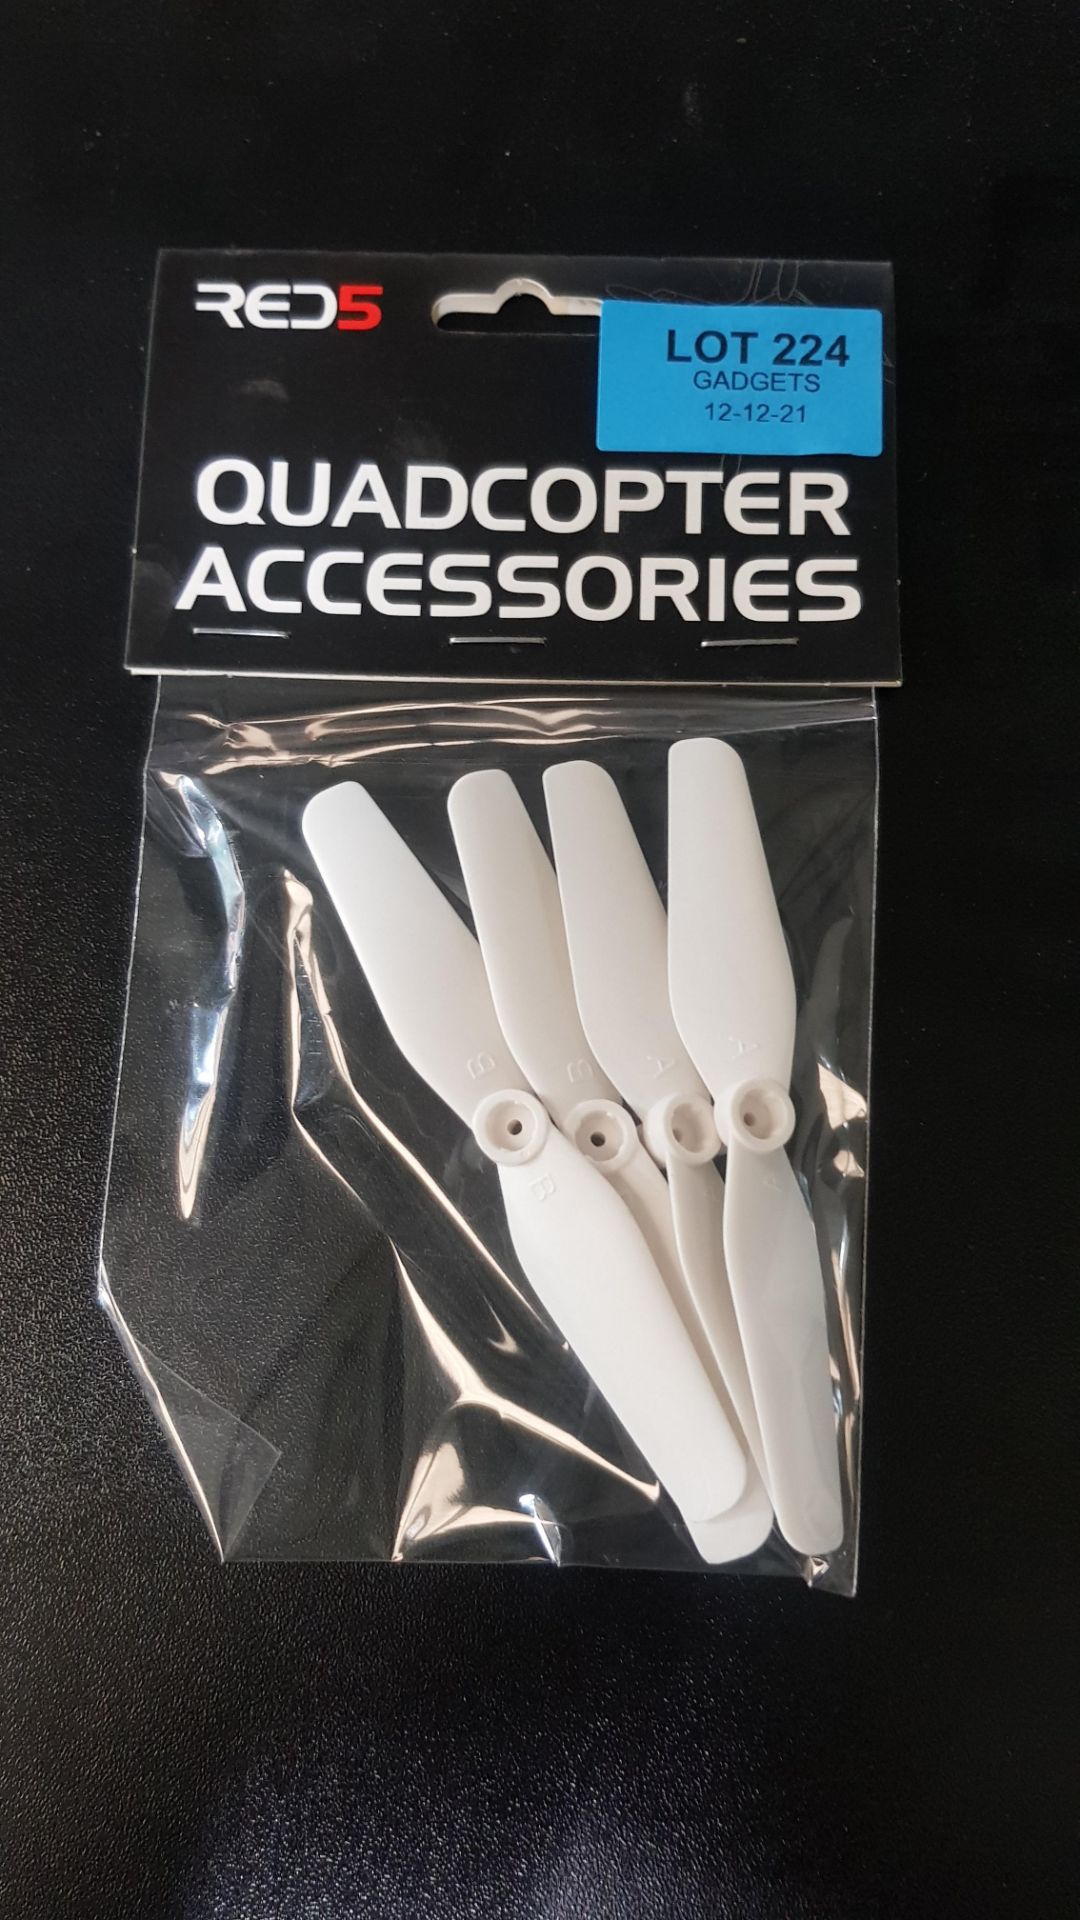 (14) Approx 210x Quadcopter Red5 Accessories Packs (All New, Sealed). Each Pack Contains 4x White Q